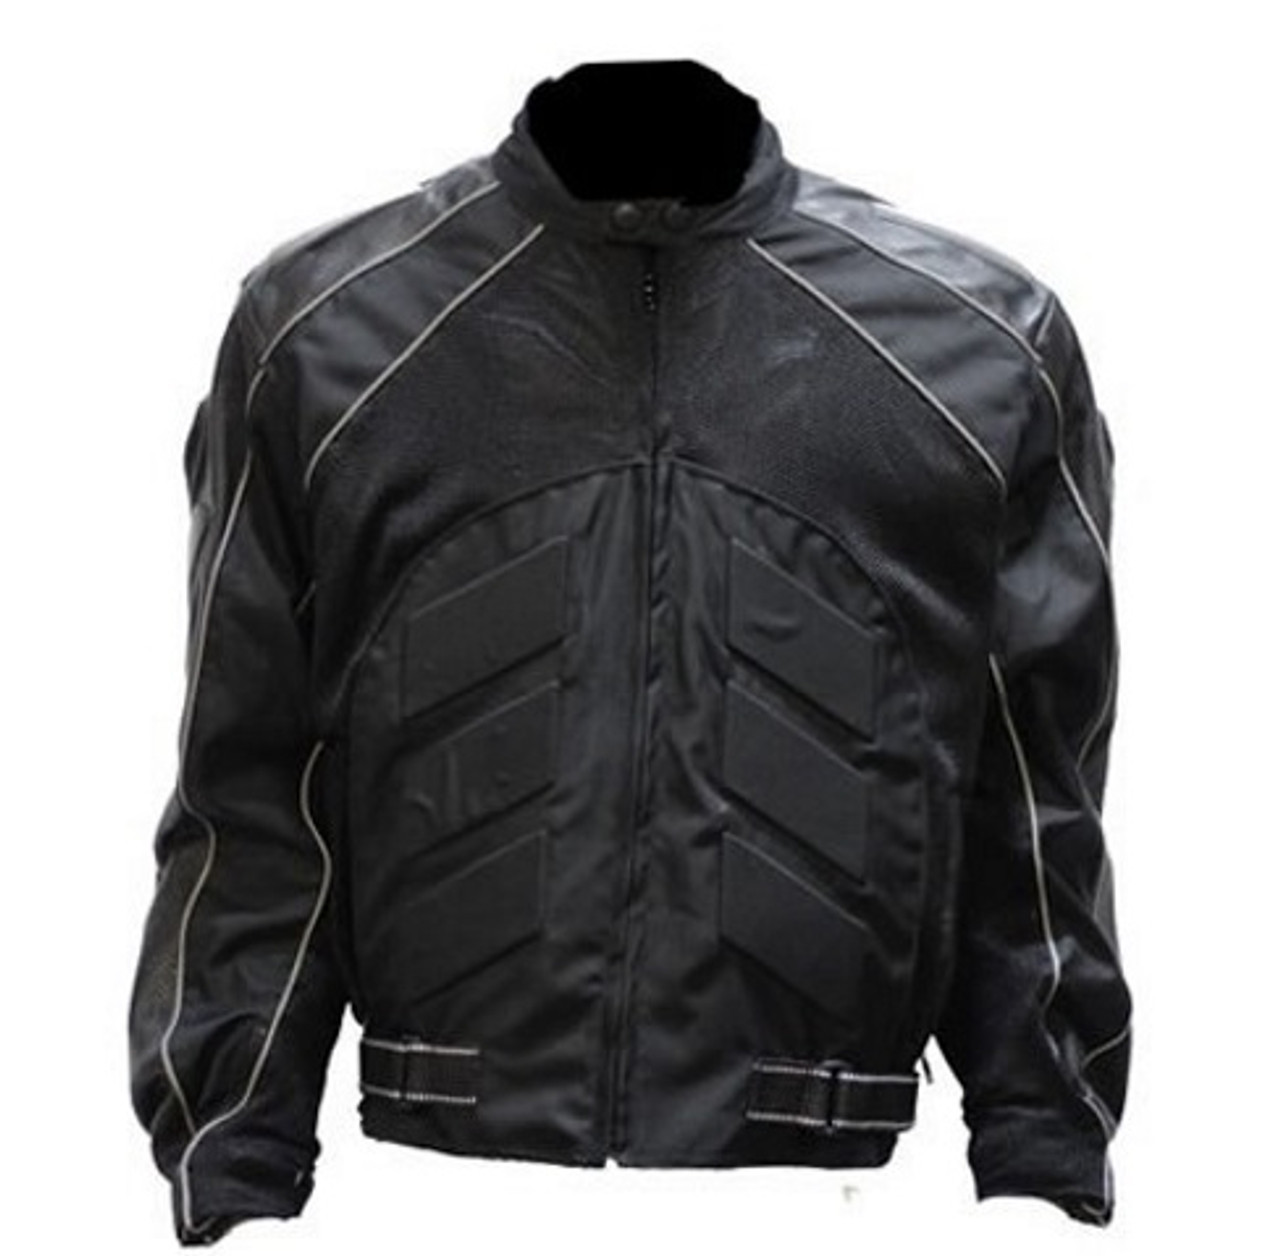  MOTORCYCLE LEATHER JACKET FOR MEN WITH ARMOR BIKERS